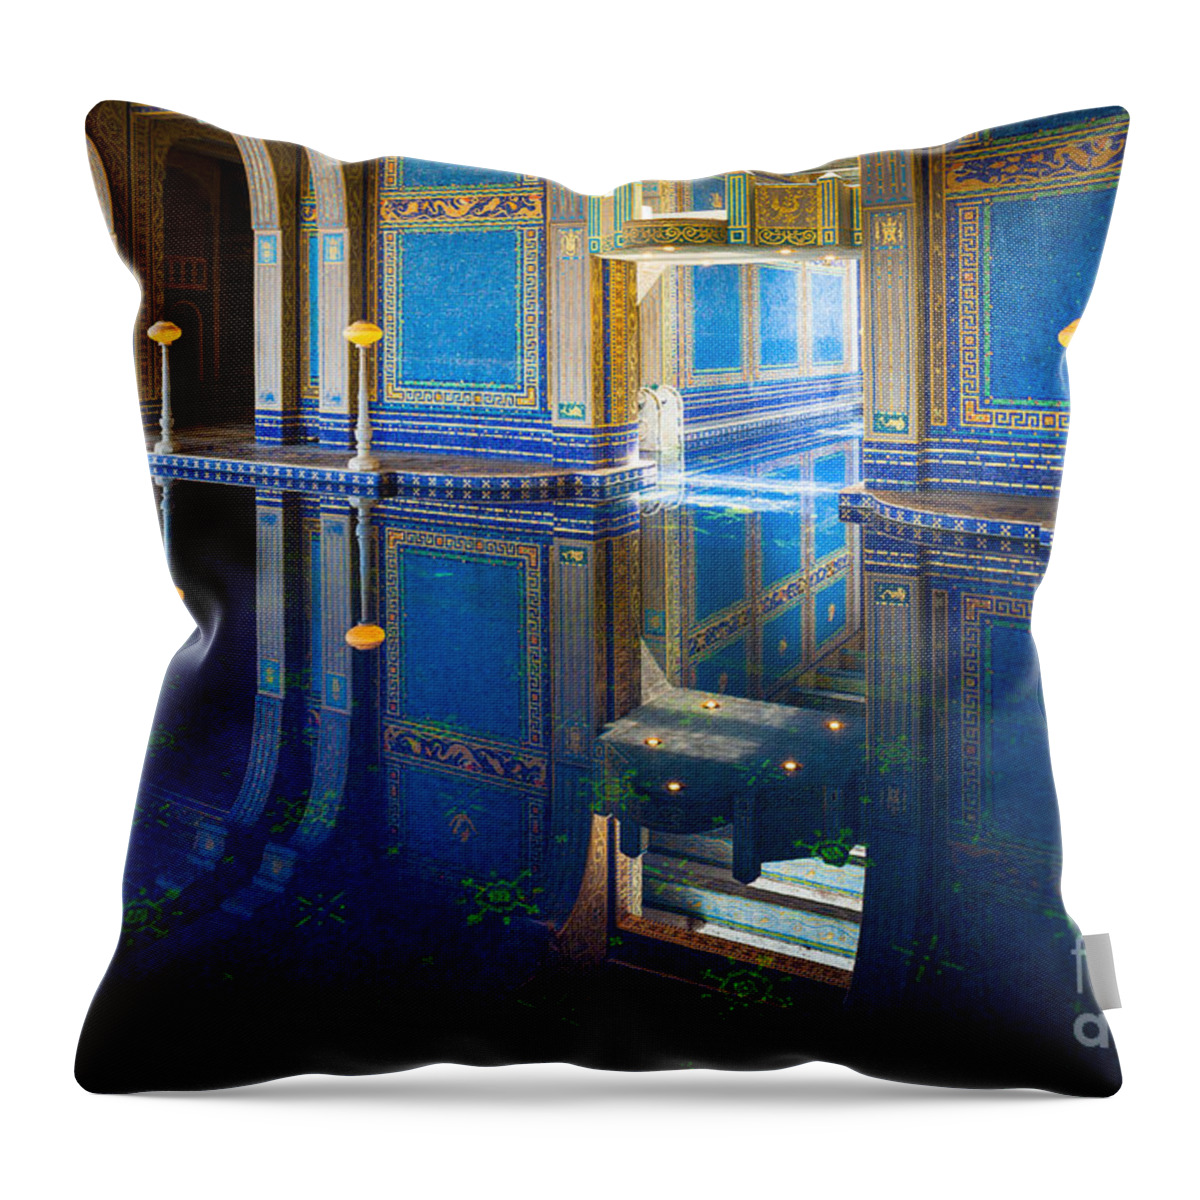 America Throw Pillow featuring the photograph Hearst Pool by Inge Johnsson